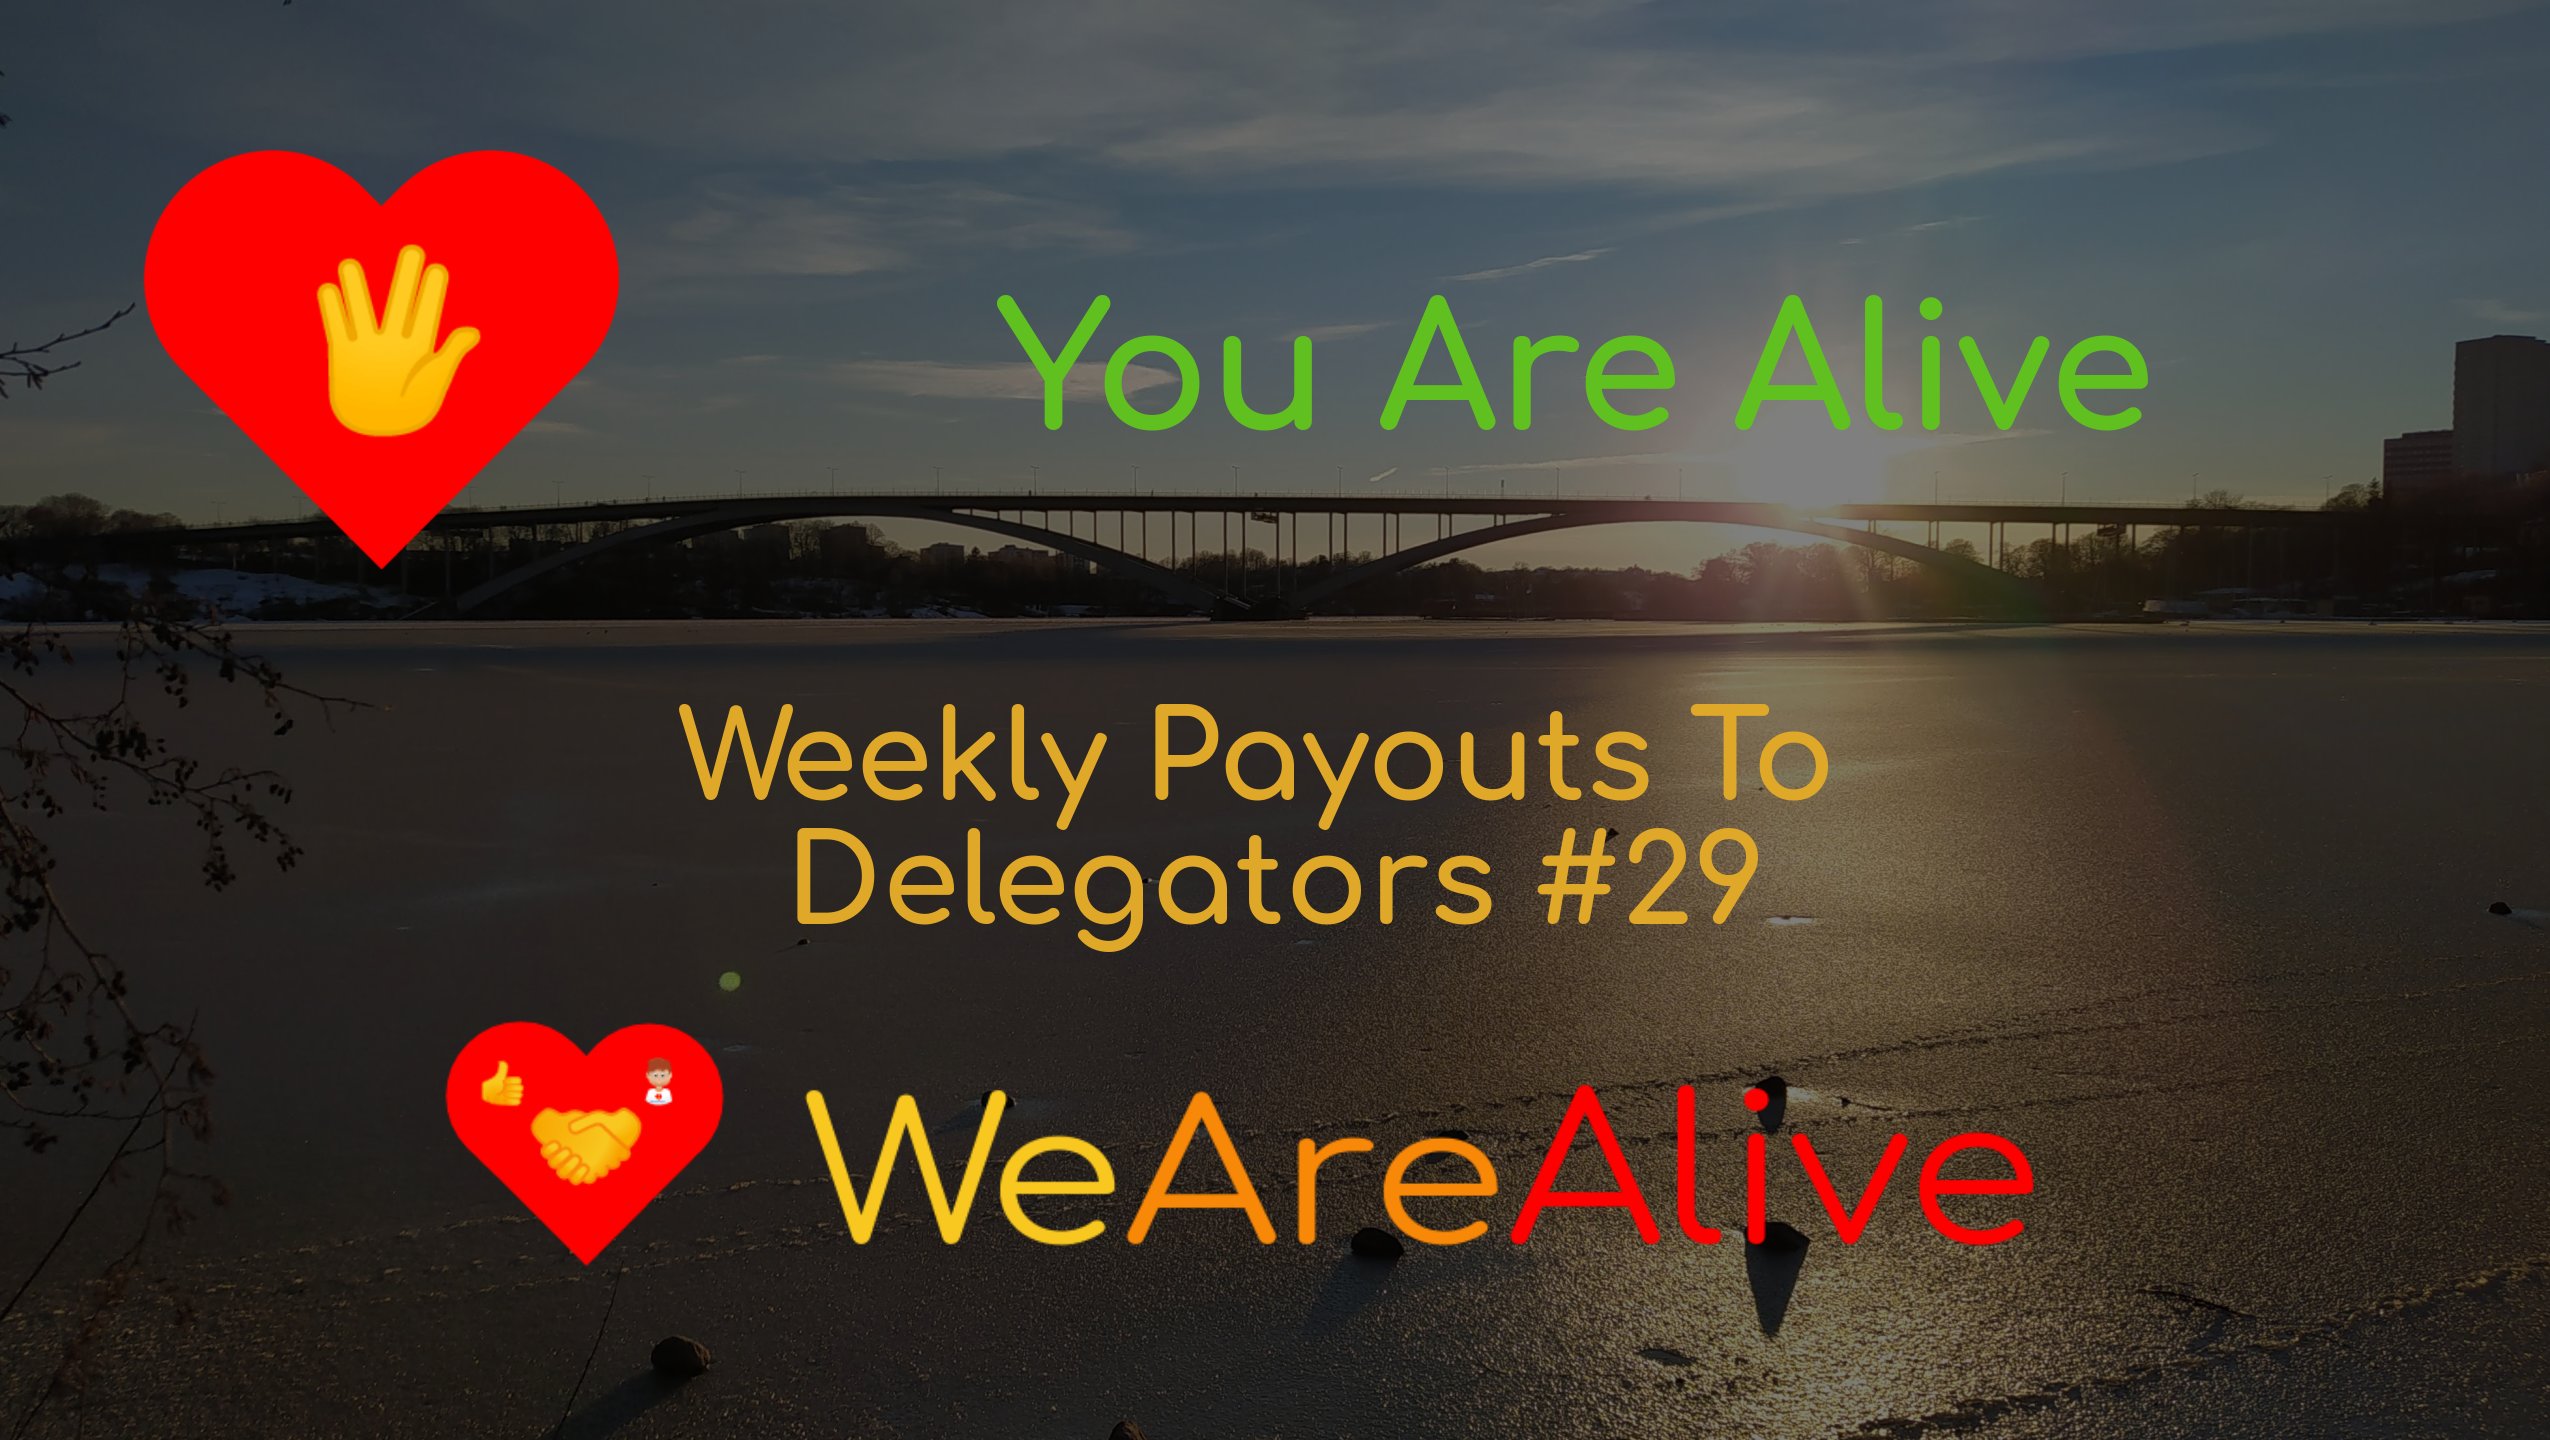 @youarealive/you-are-alive-weekly-payouts-to-hp-delegators-29